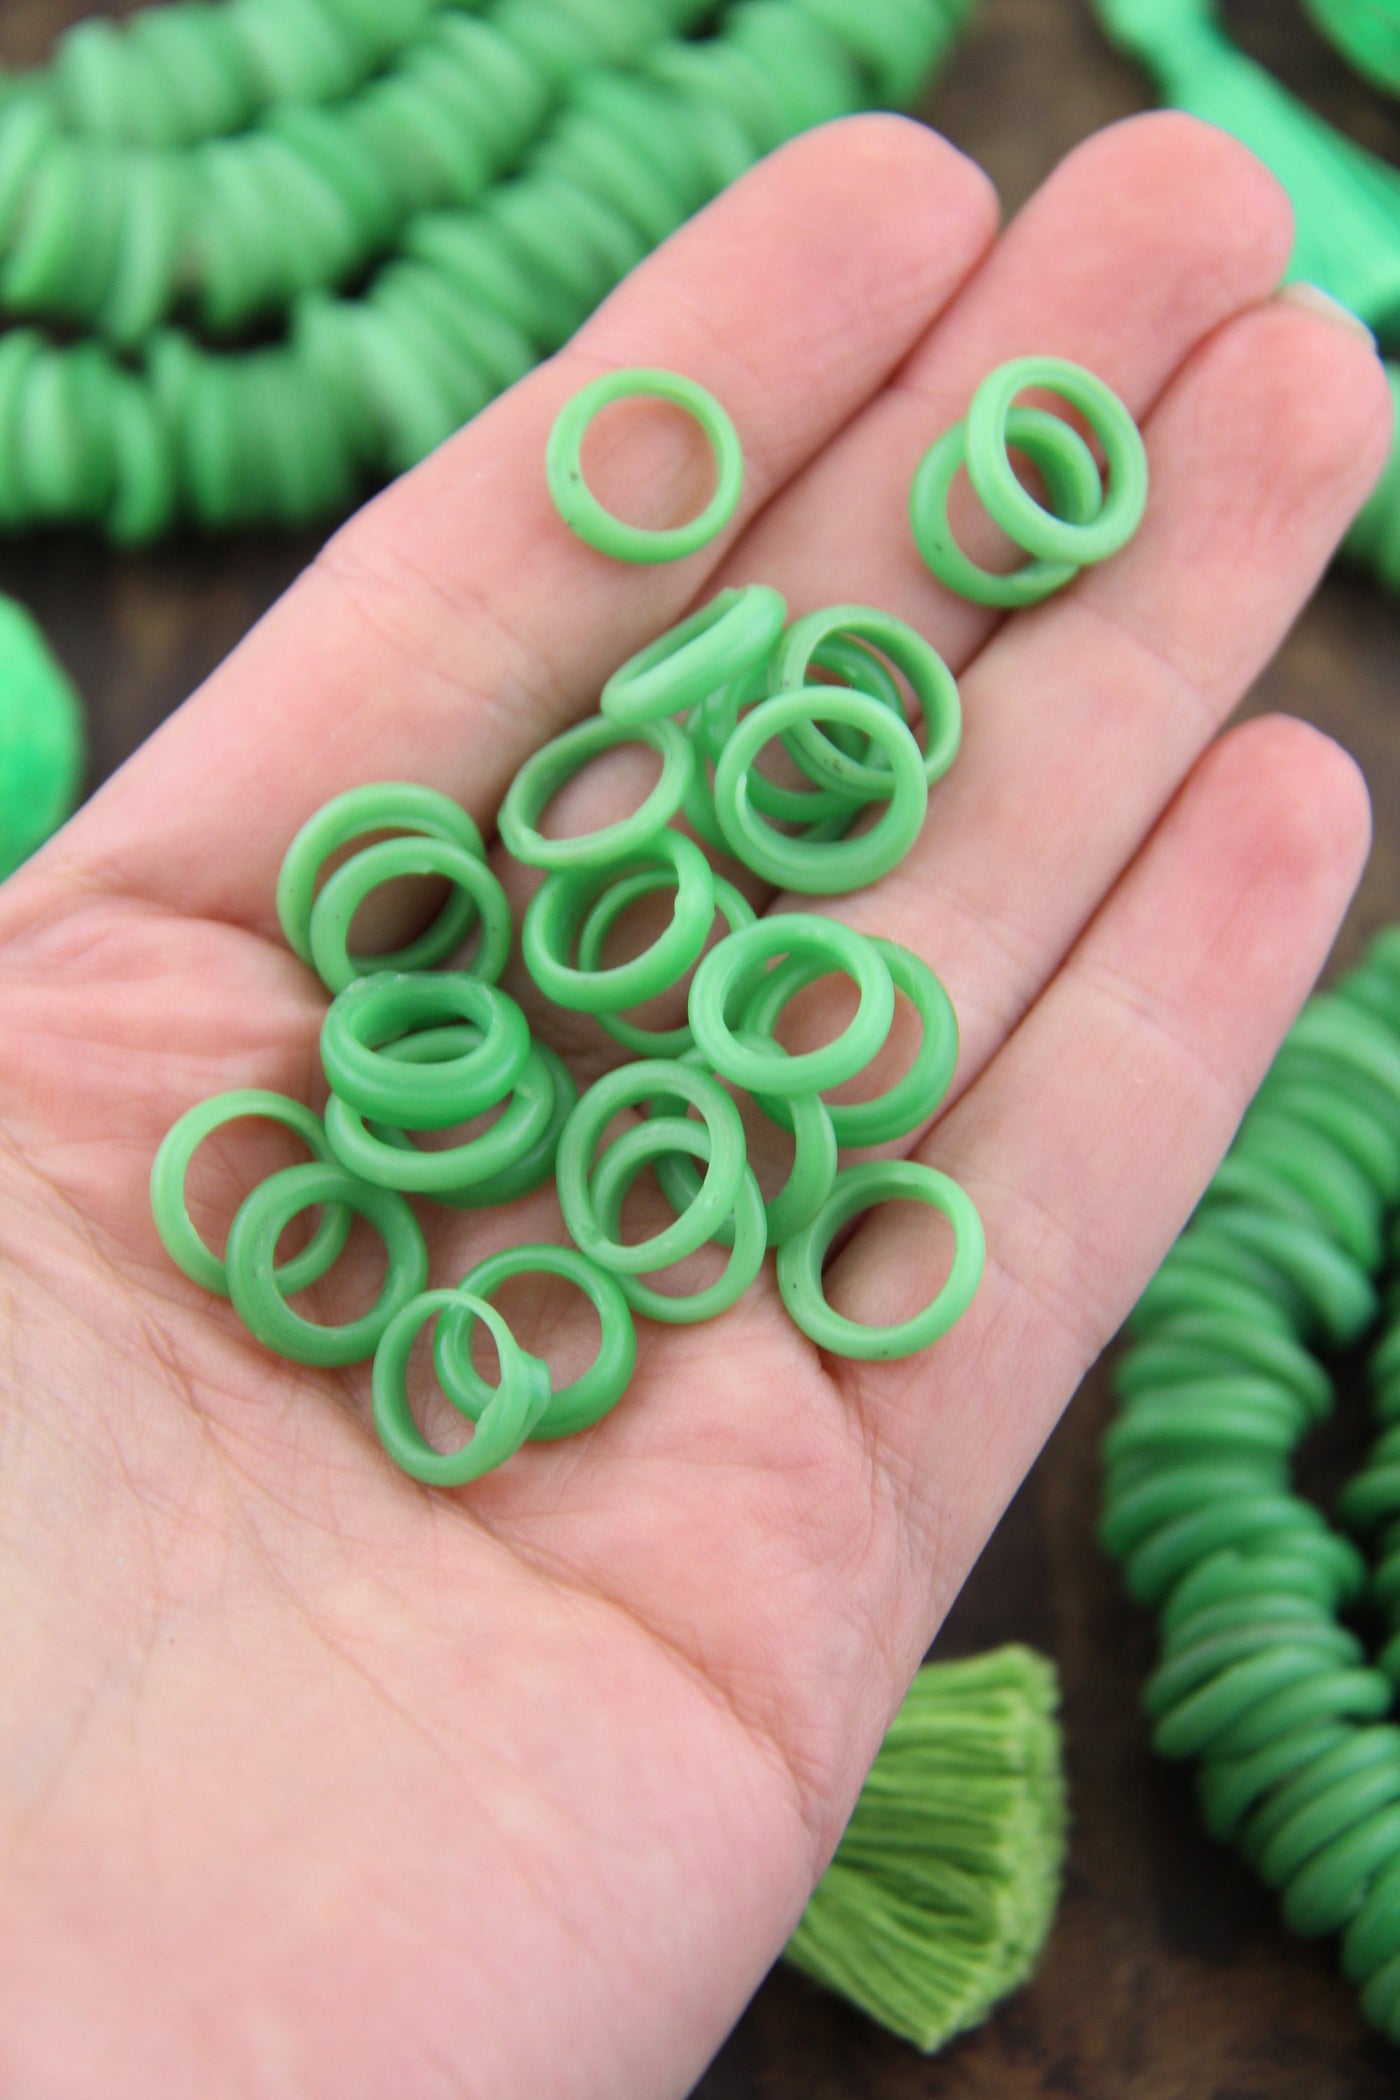 Dutch Donut Beads: Green Large Hole African Glass, 11-12mm, 10 pieces